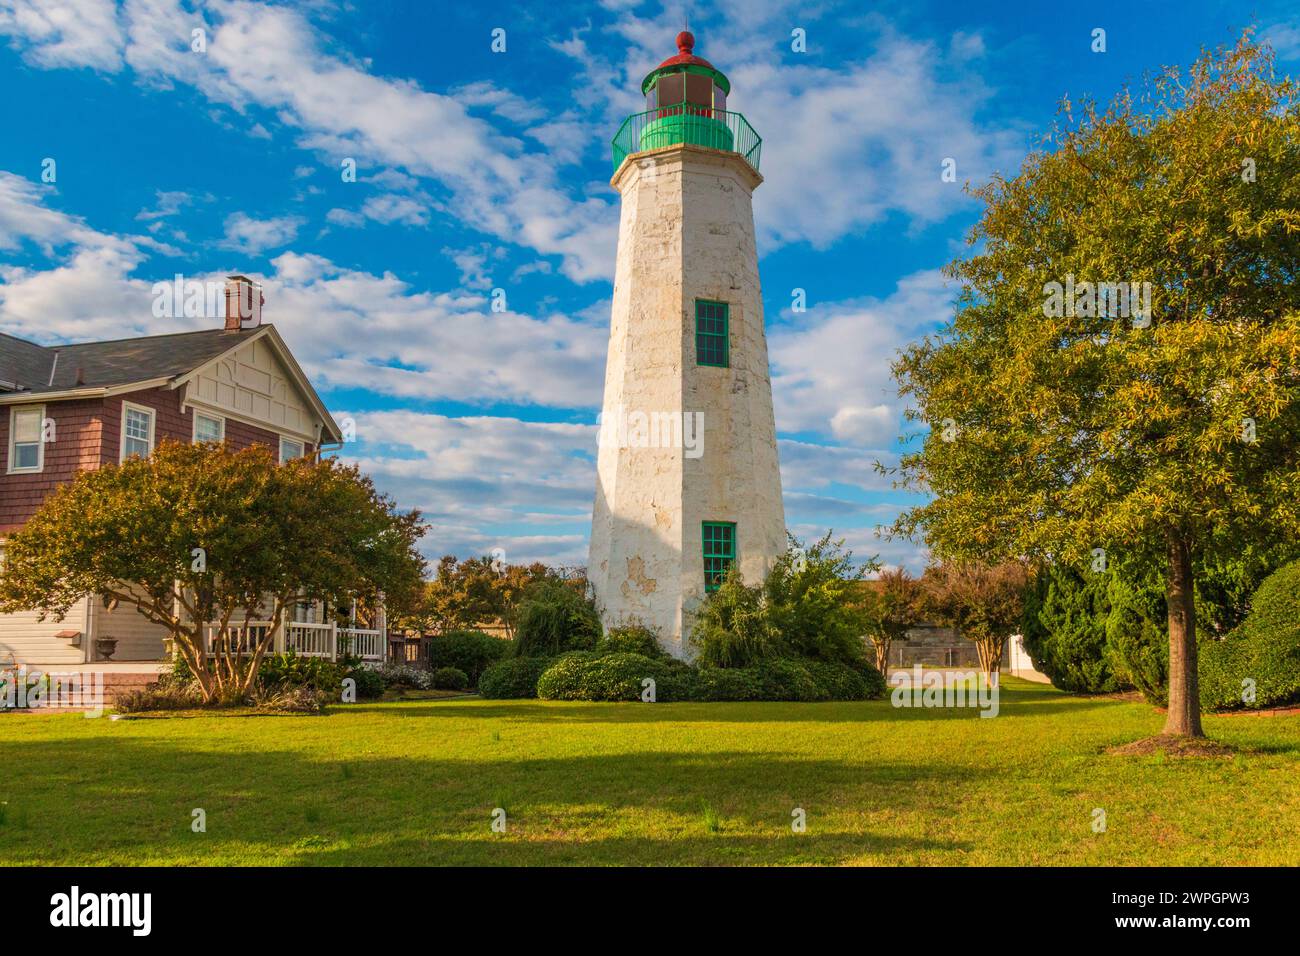 Old Point Comfort Lighthouse, built in 1803, at the entrance to Hampton Roads Harbor in Virginia inside Fort Monroe National Monument. Stock Photo